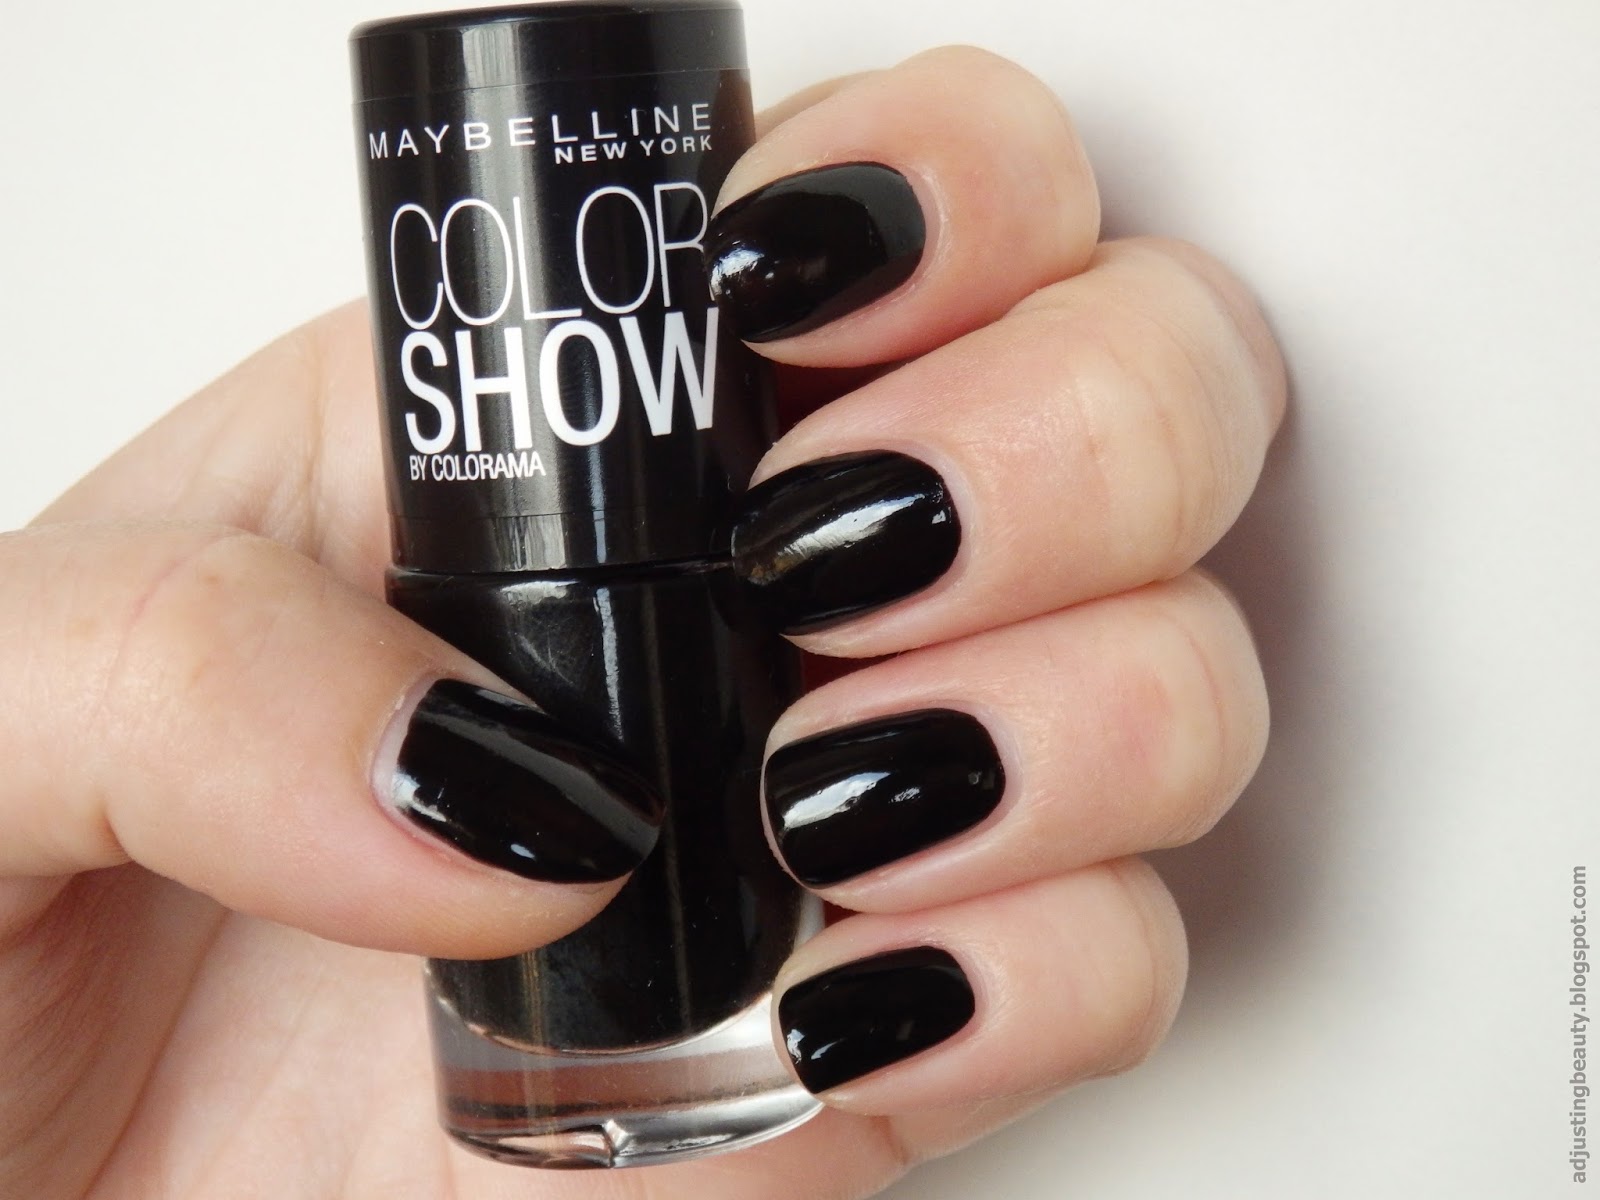 Maybelline Color Show Nail Polish - wide 8